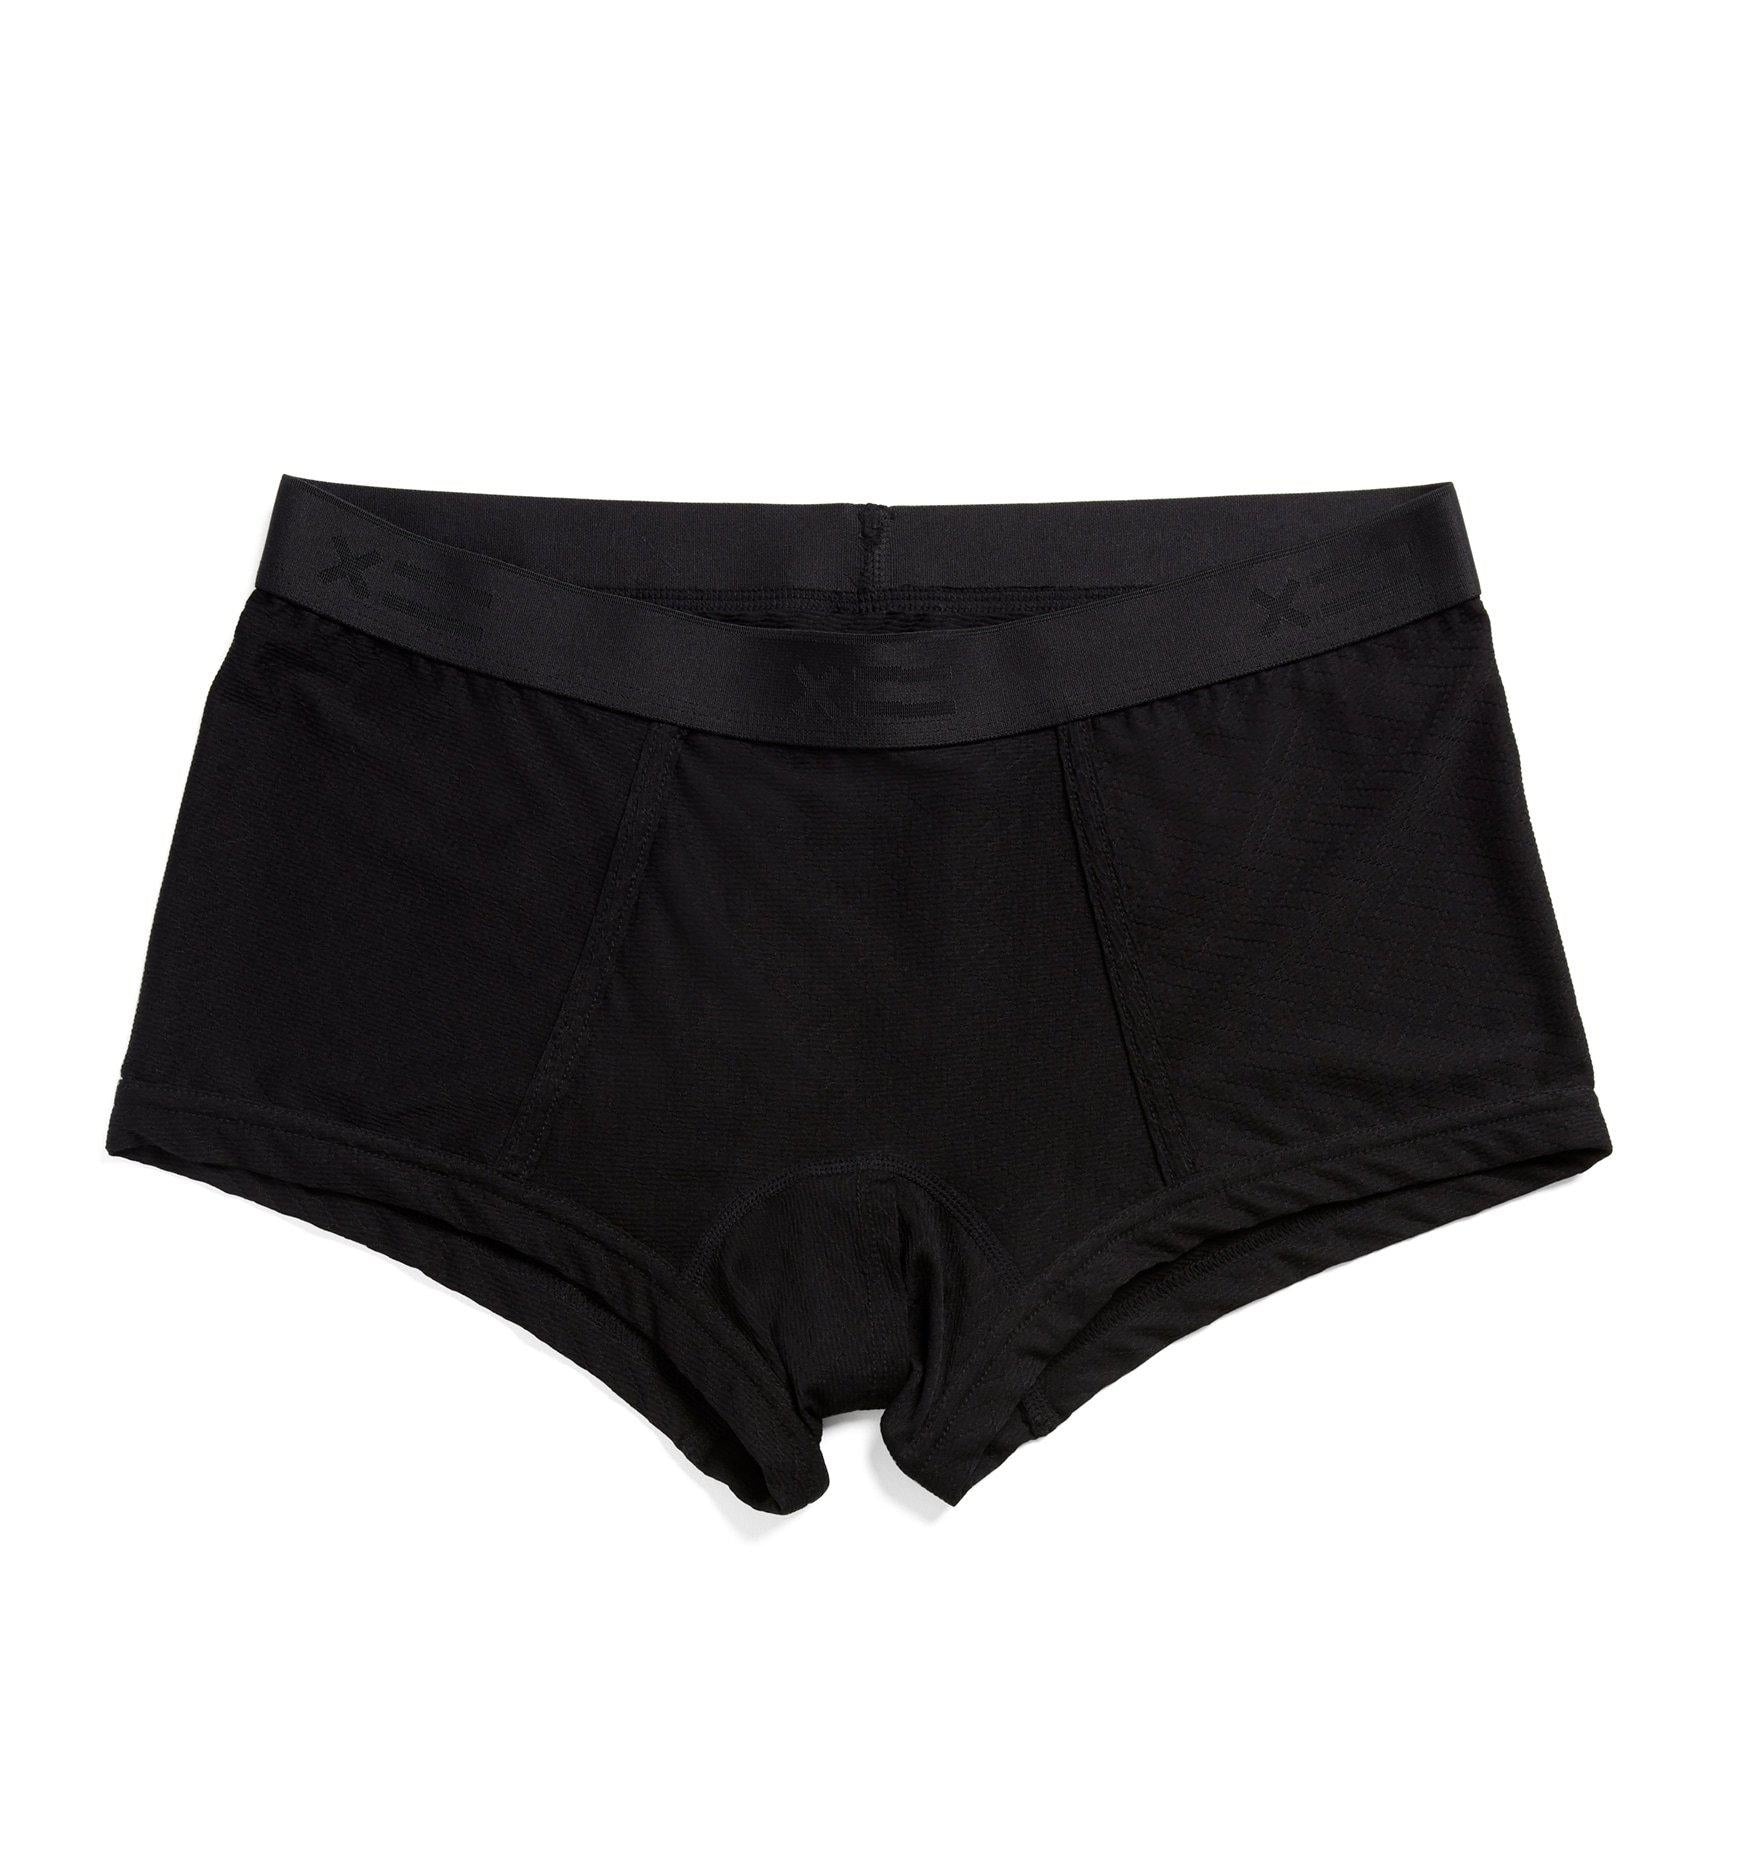 Stand to Pee Boy Shorts LC - Traveler Black – TomboyX